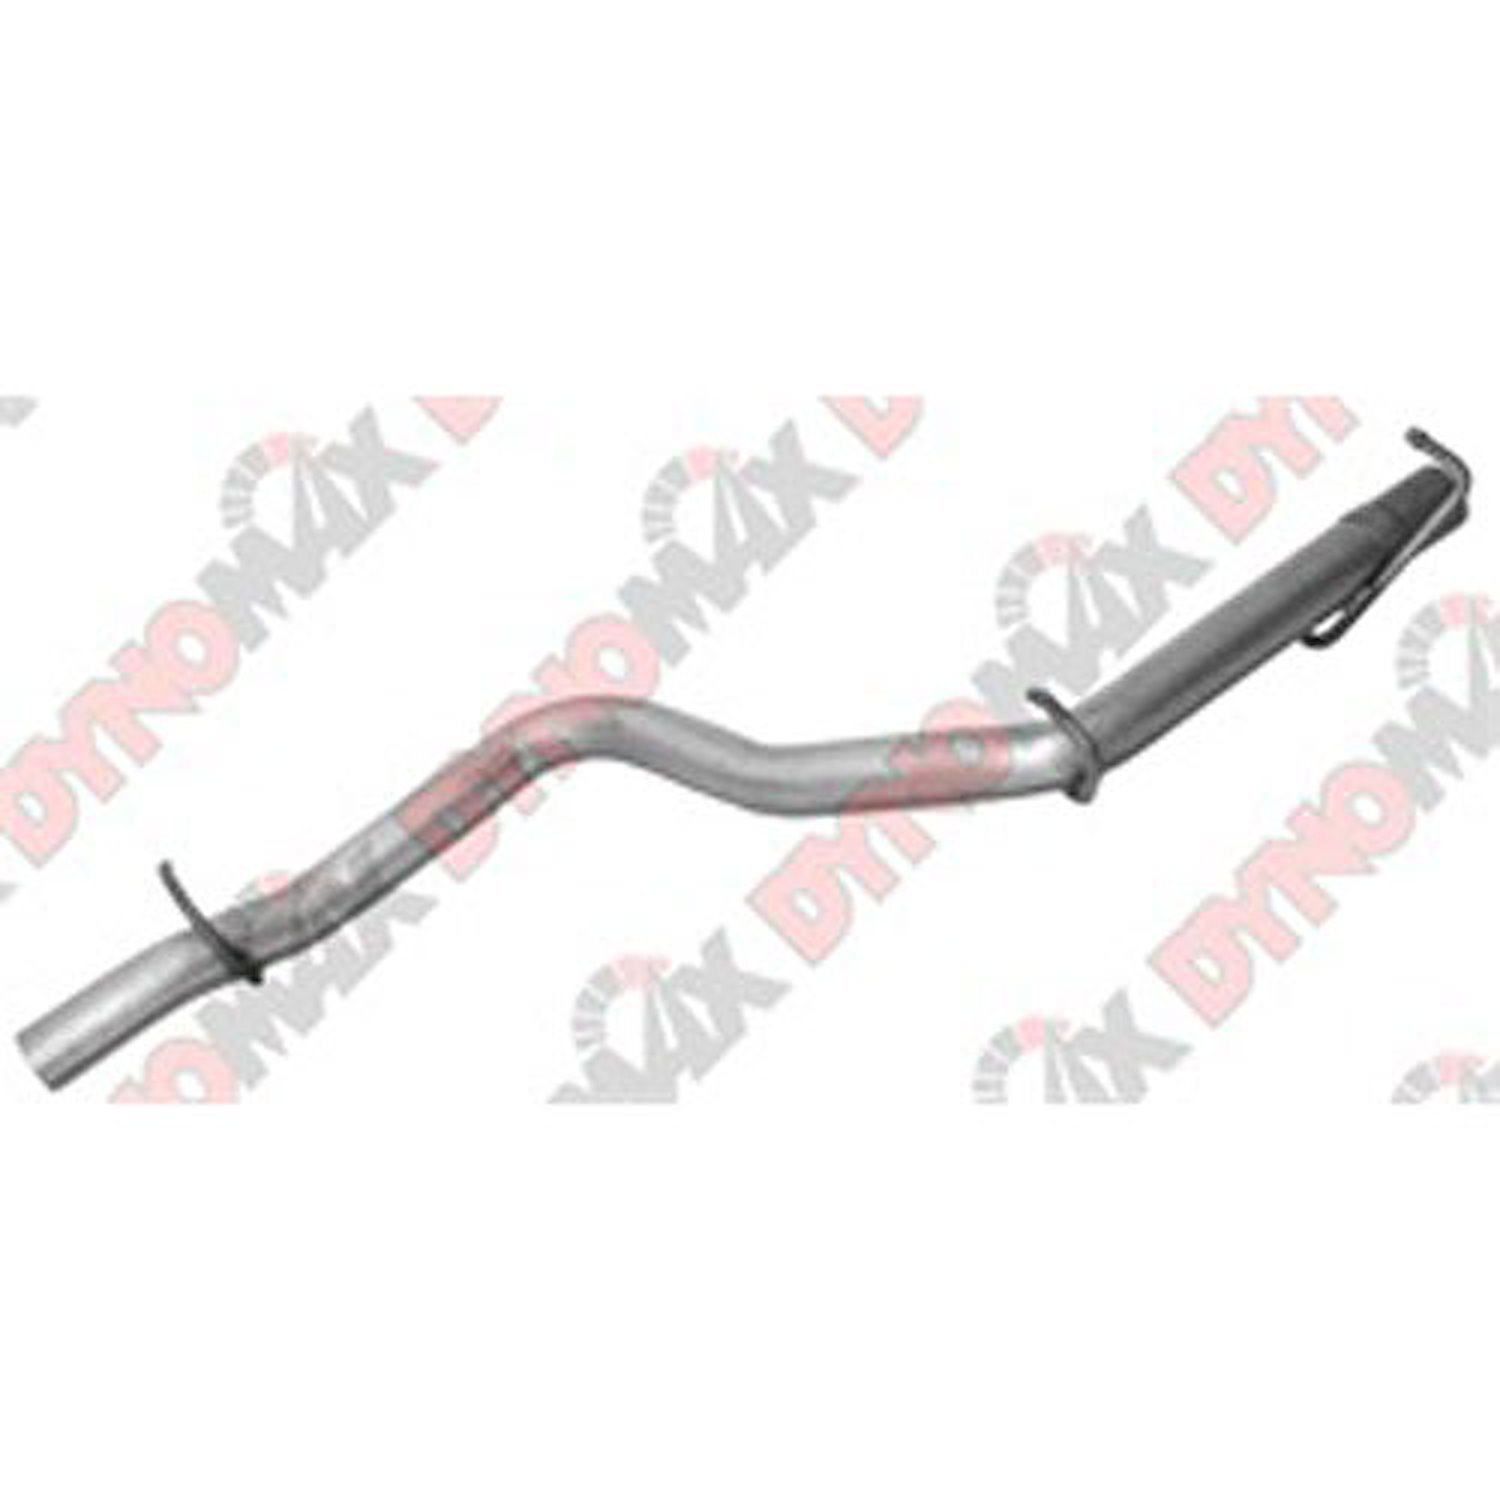 Replacement Tailpipe Length: 60"